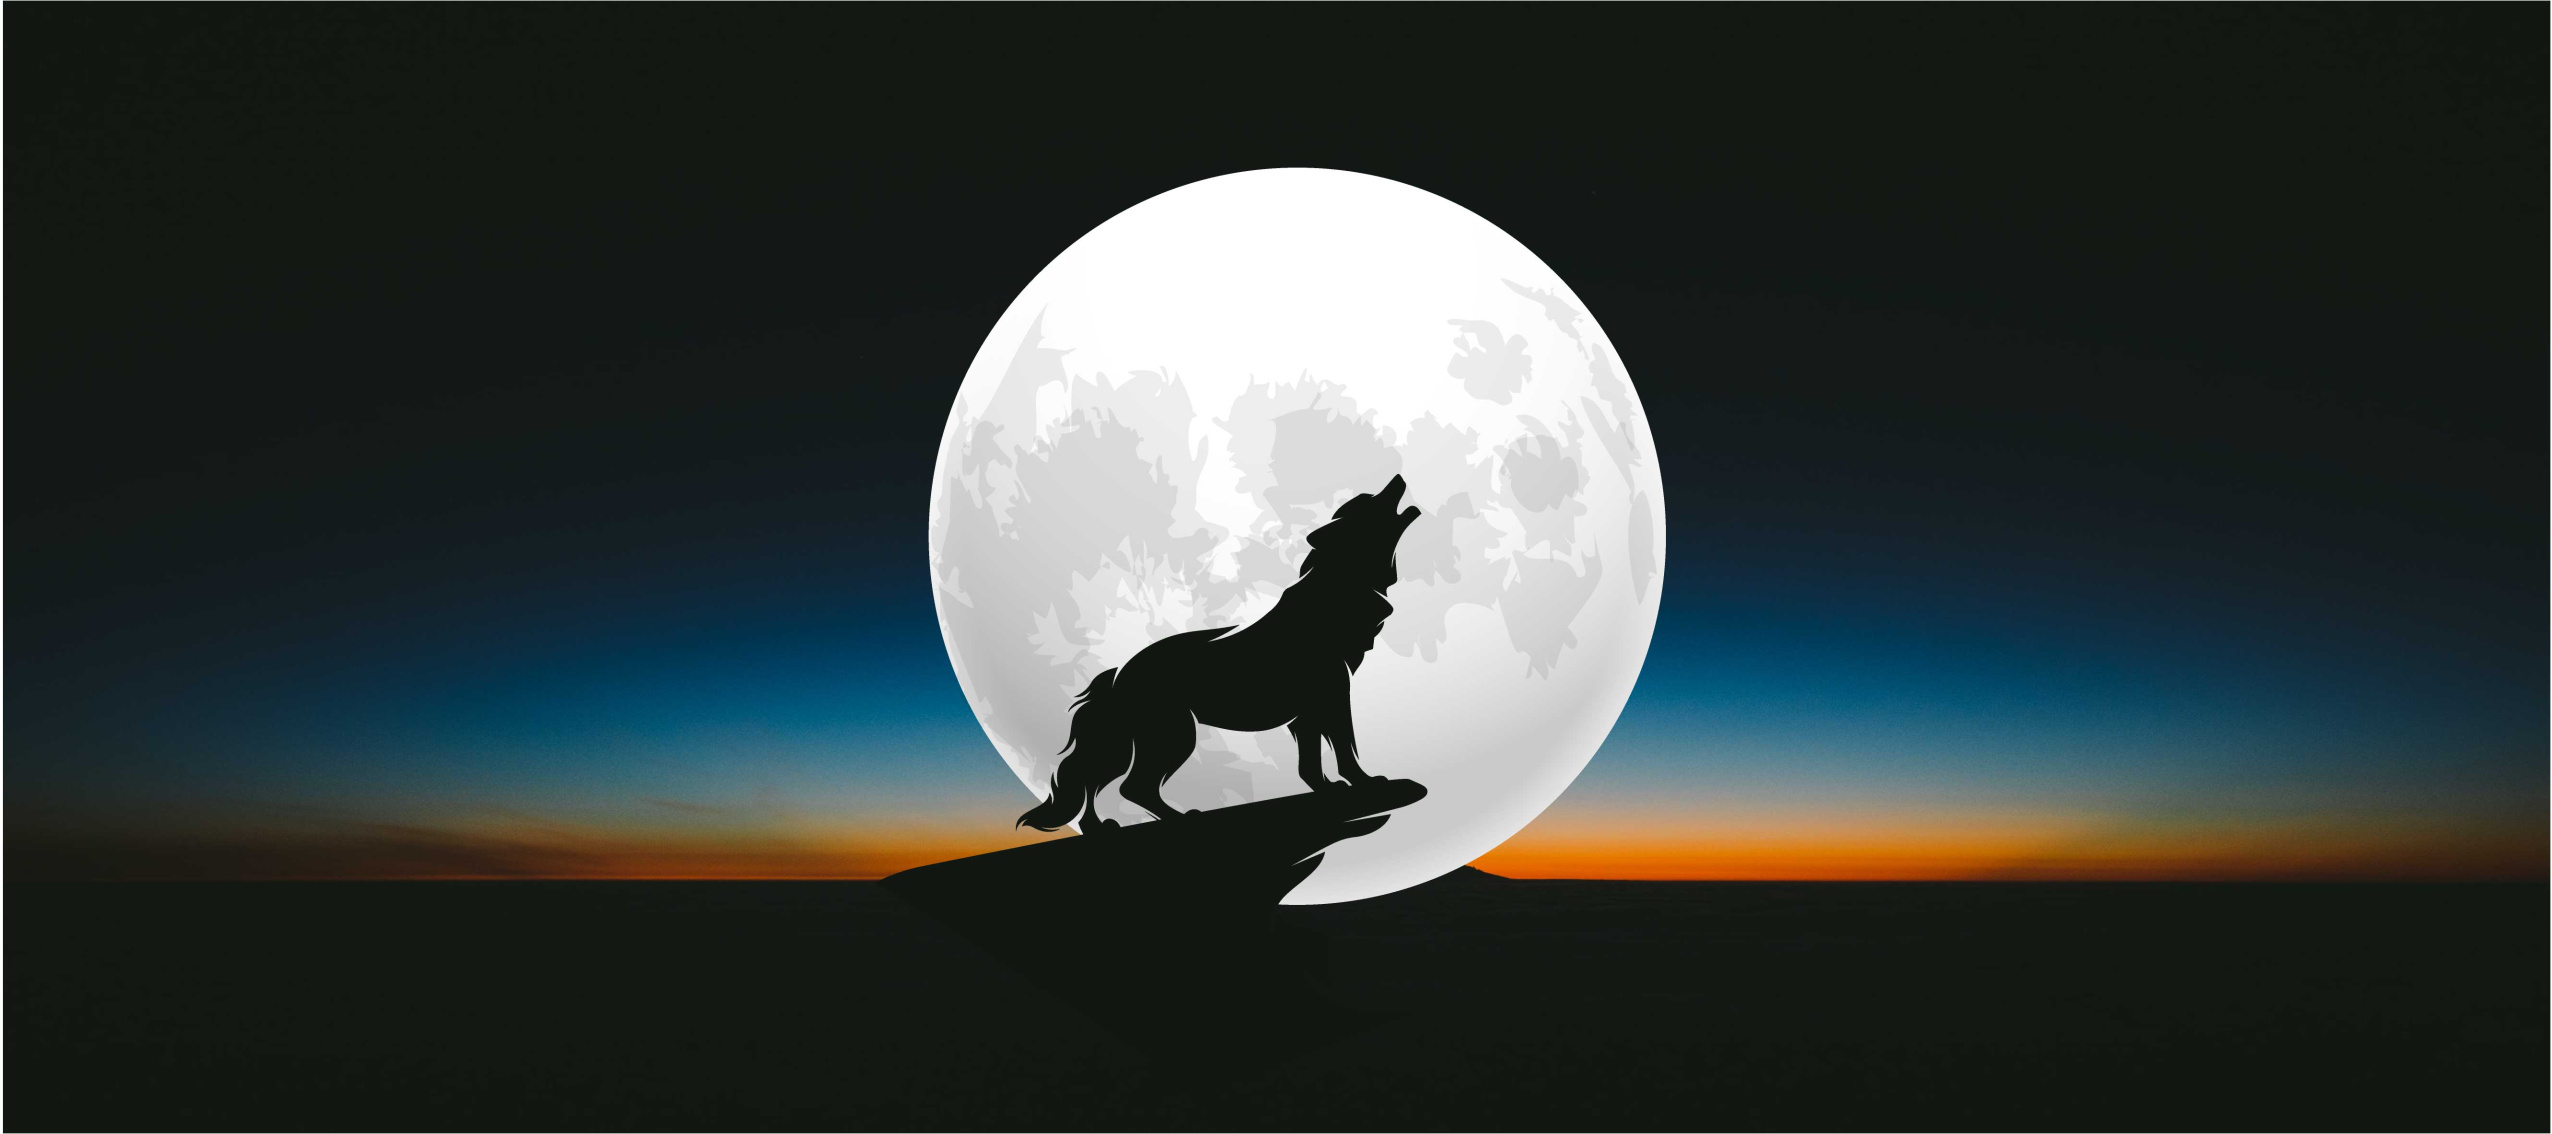 Howling wolf in moonlight, Captivating mouse pads, TenStickers, Unique home decor, 2560x1140 Dual Screen Desktop